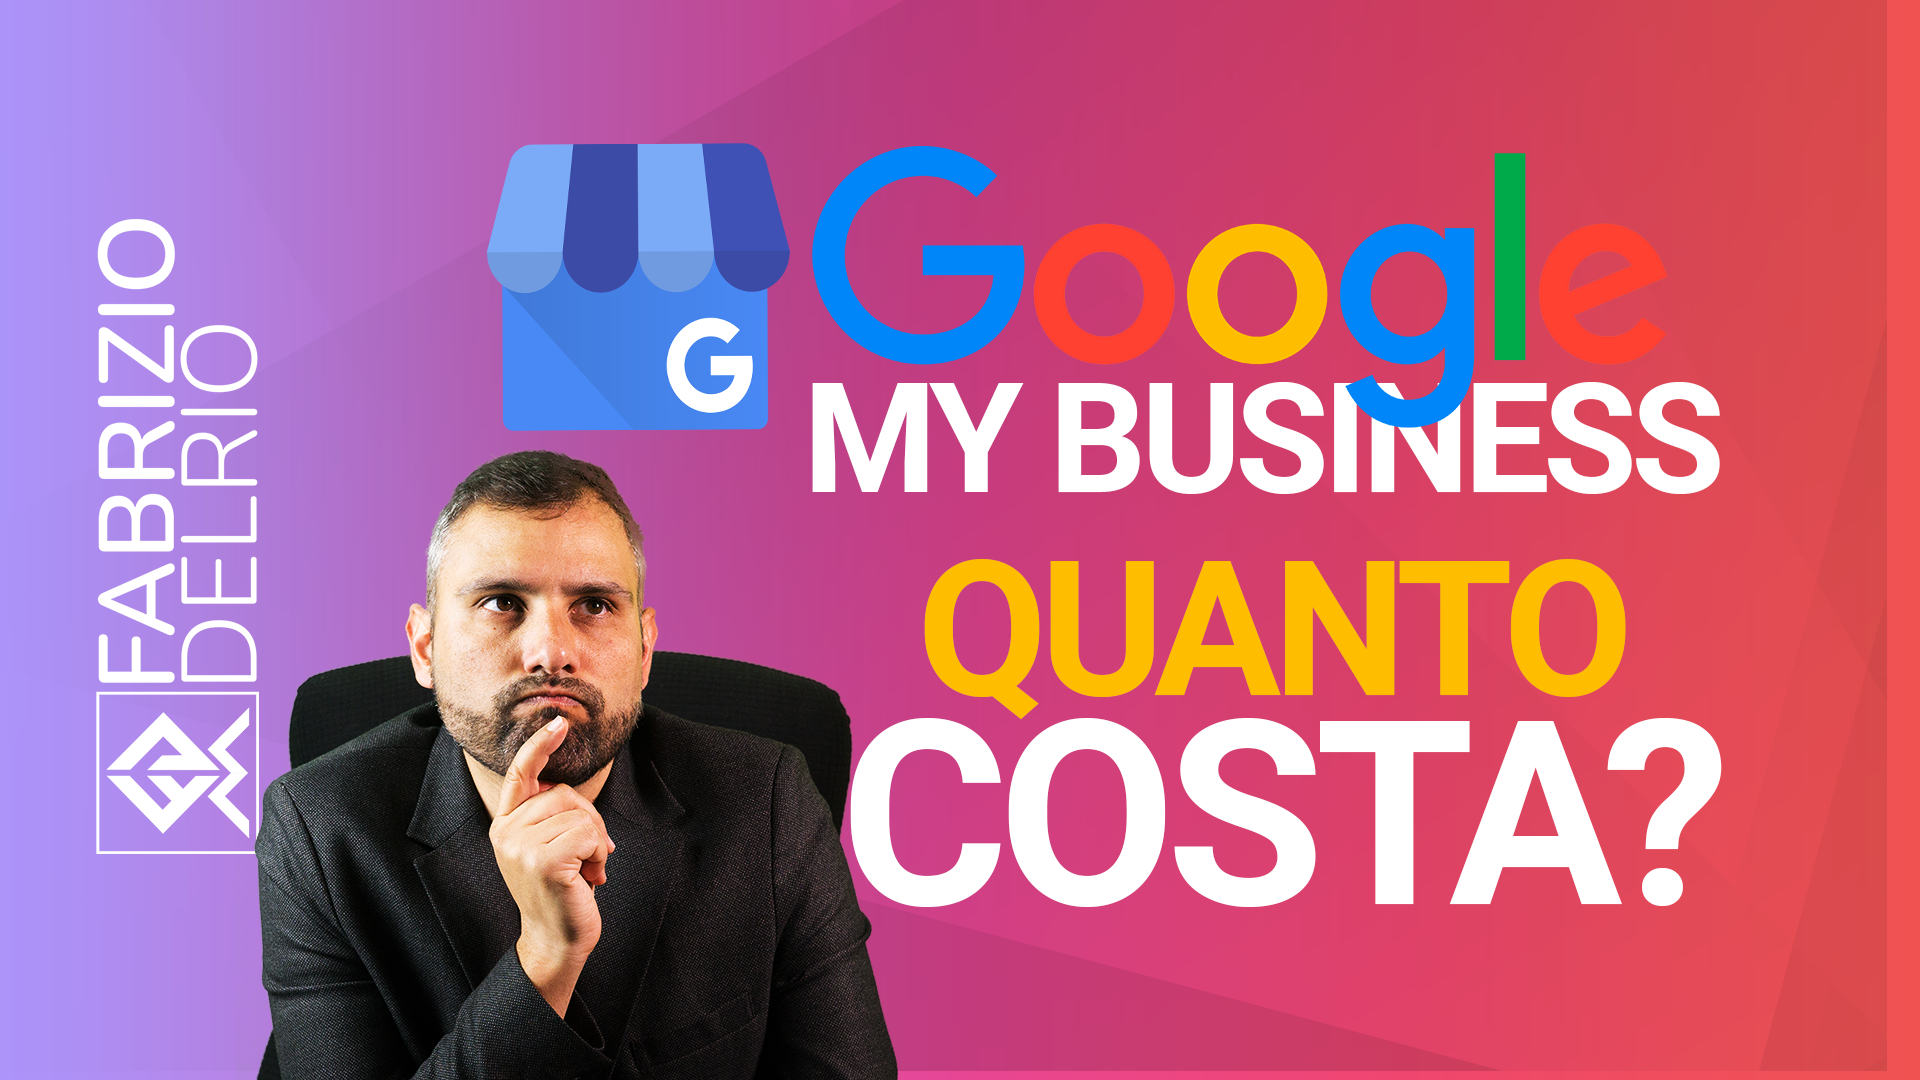 google-my-business-costi-1638549536.png